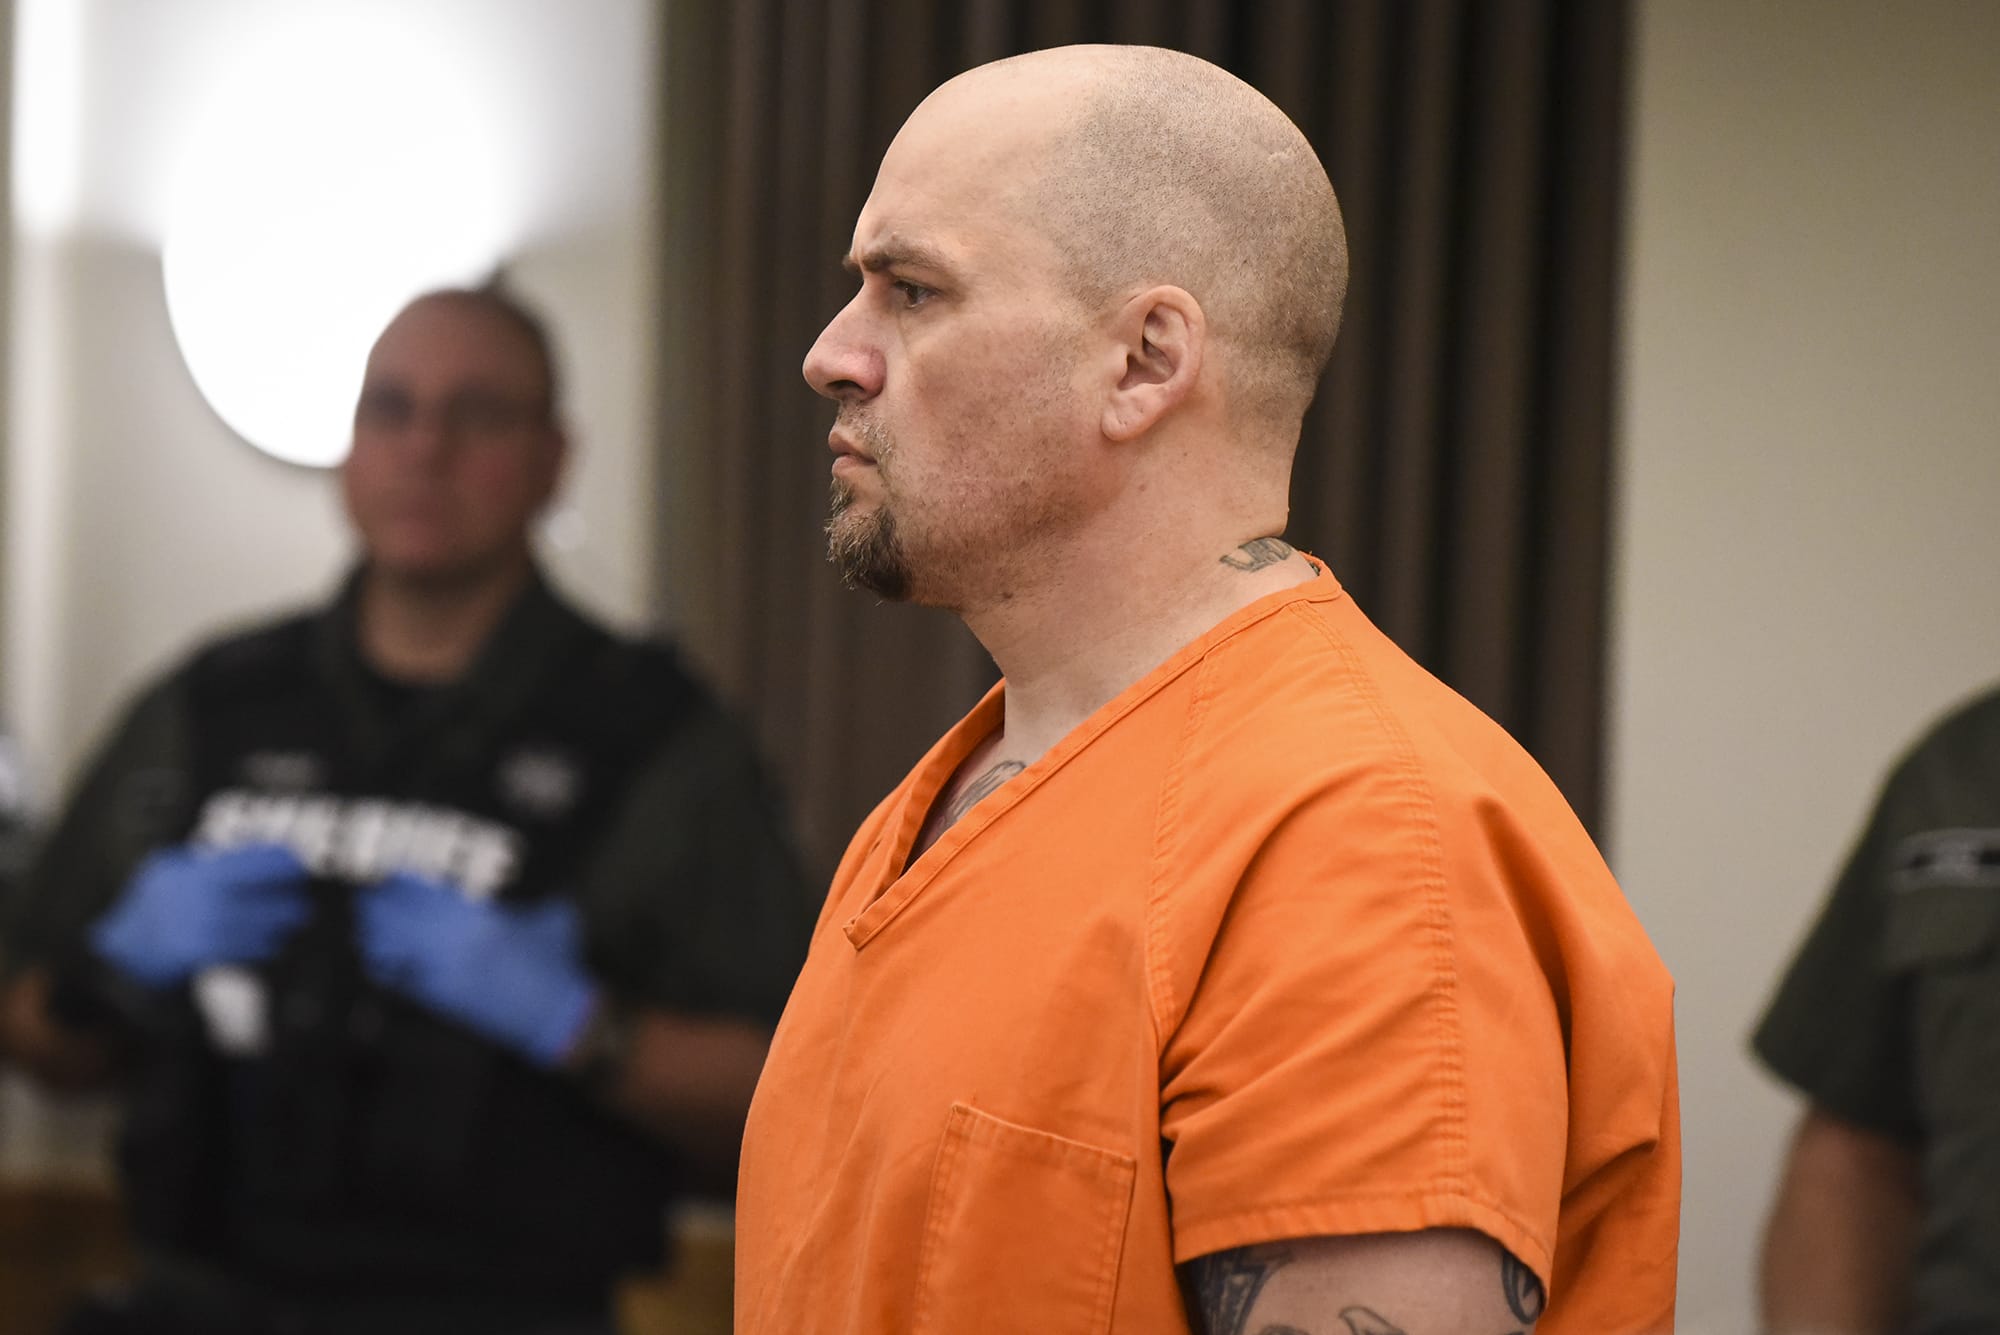 Shannon Stover, who is accused of impersonating a police officer as a ruse to kidnap and rape a woman, appeared in Clark County Superior Court on Monday.